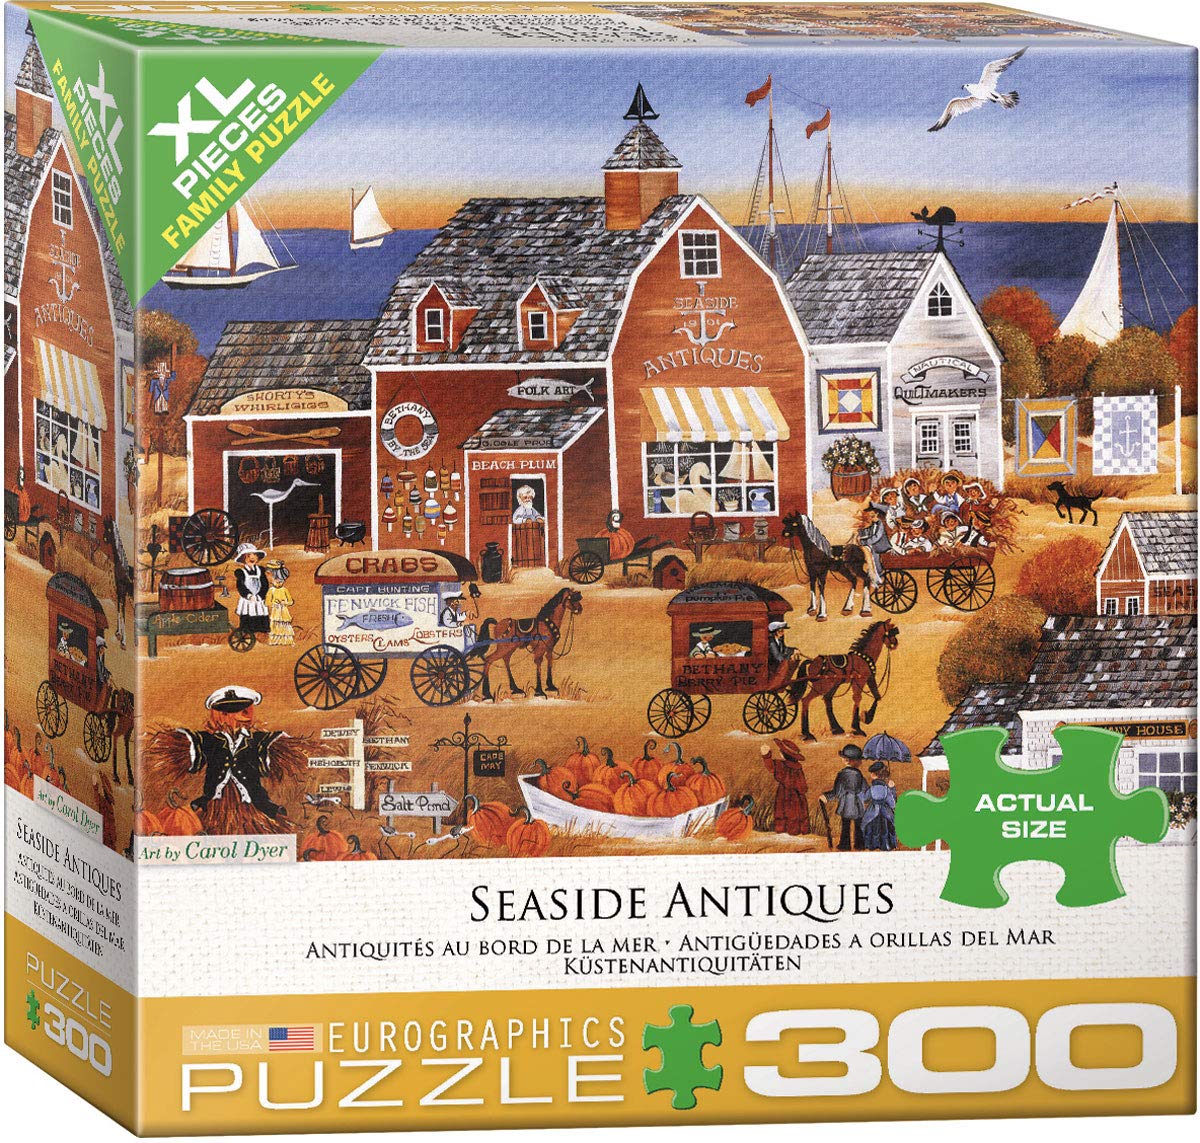 Eurographics 8300-5390 XXL Pieces - Seaside Antiques by Carol Dyer 300 Piece Jigsaw Puzzle